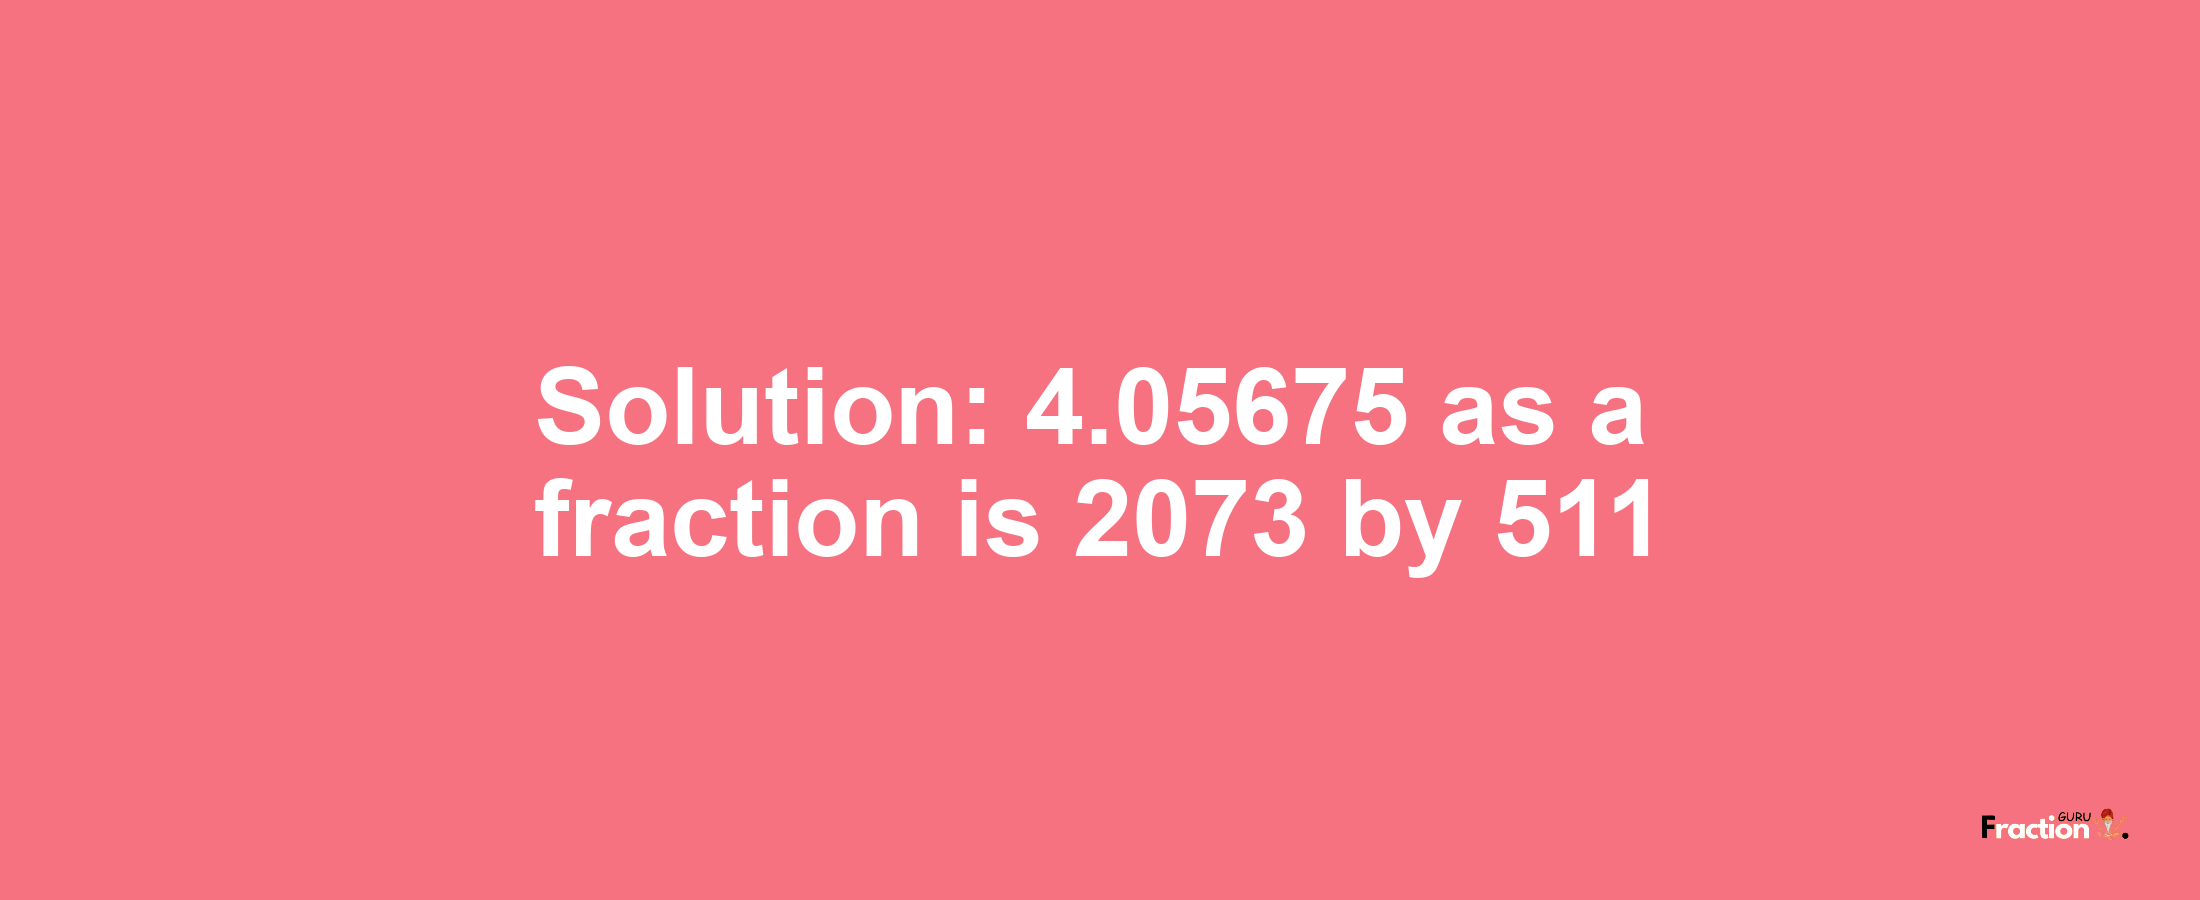 Solution:4.05675 as a fraction is 2073/511